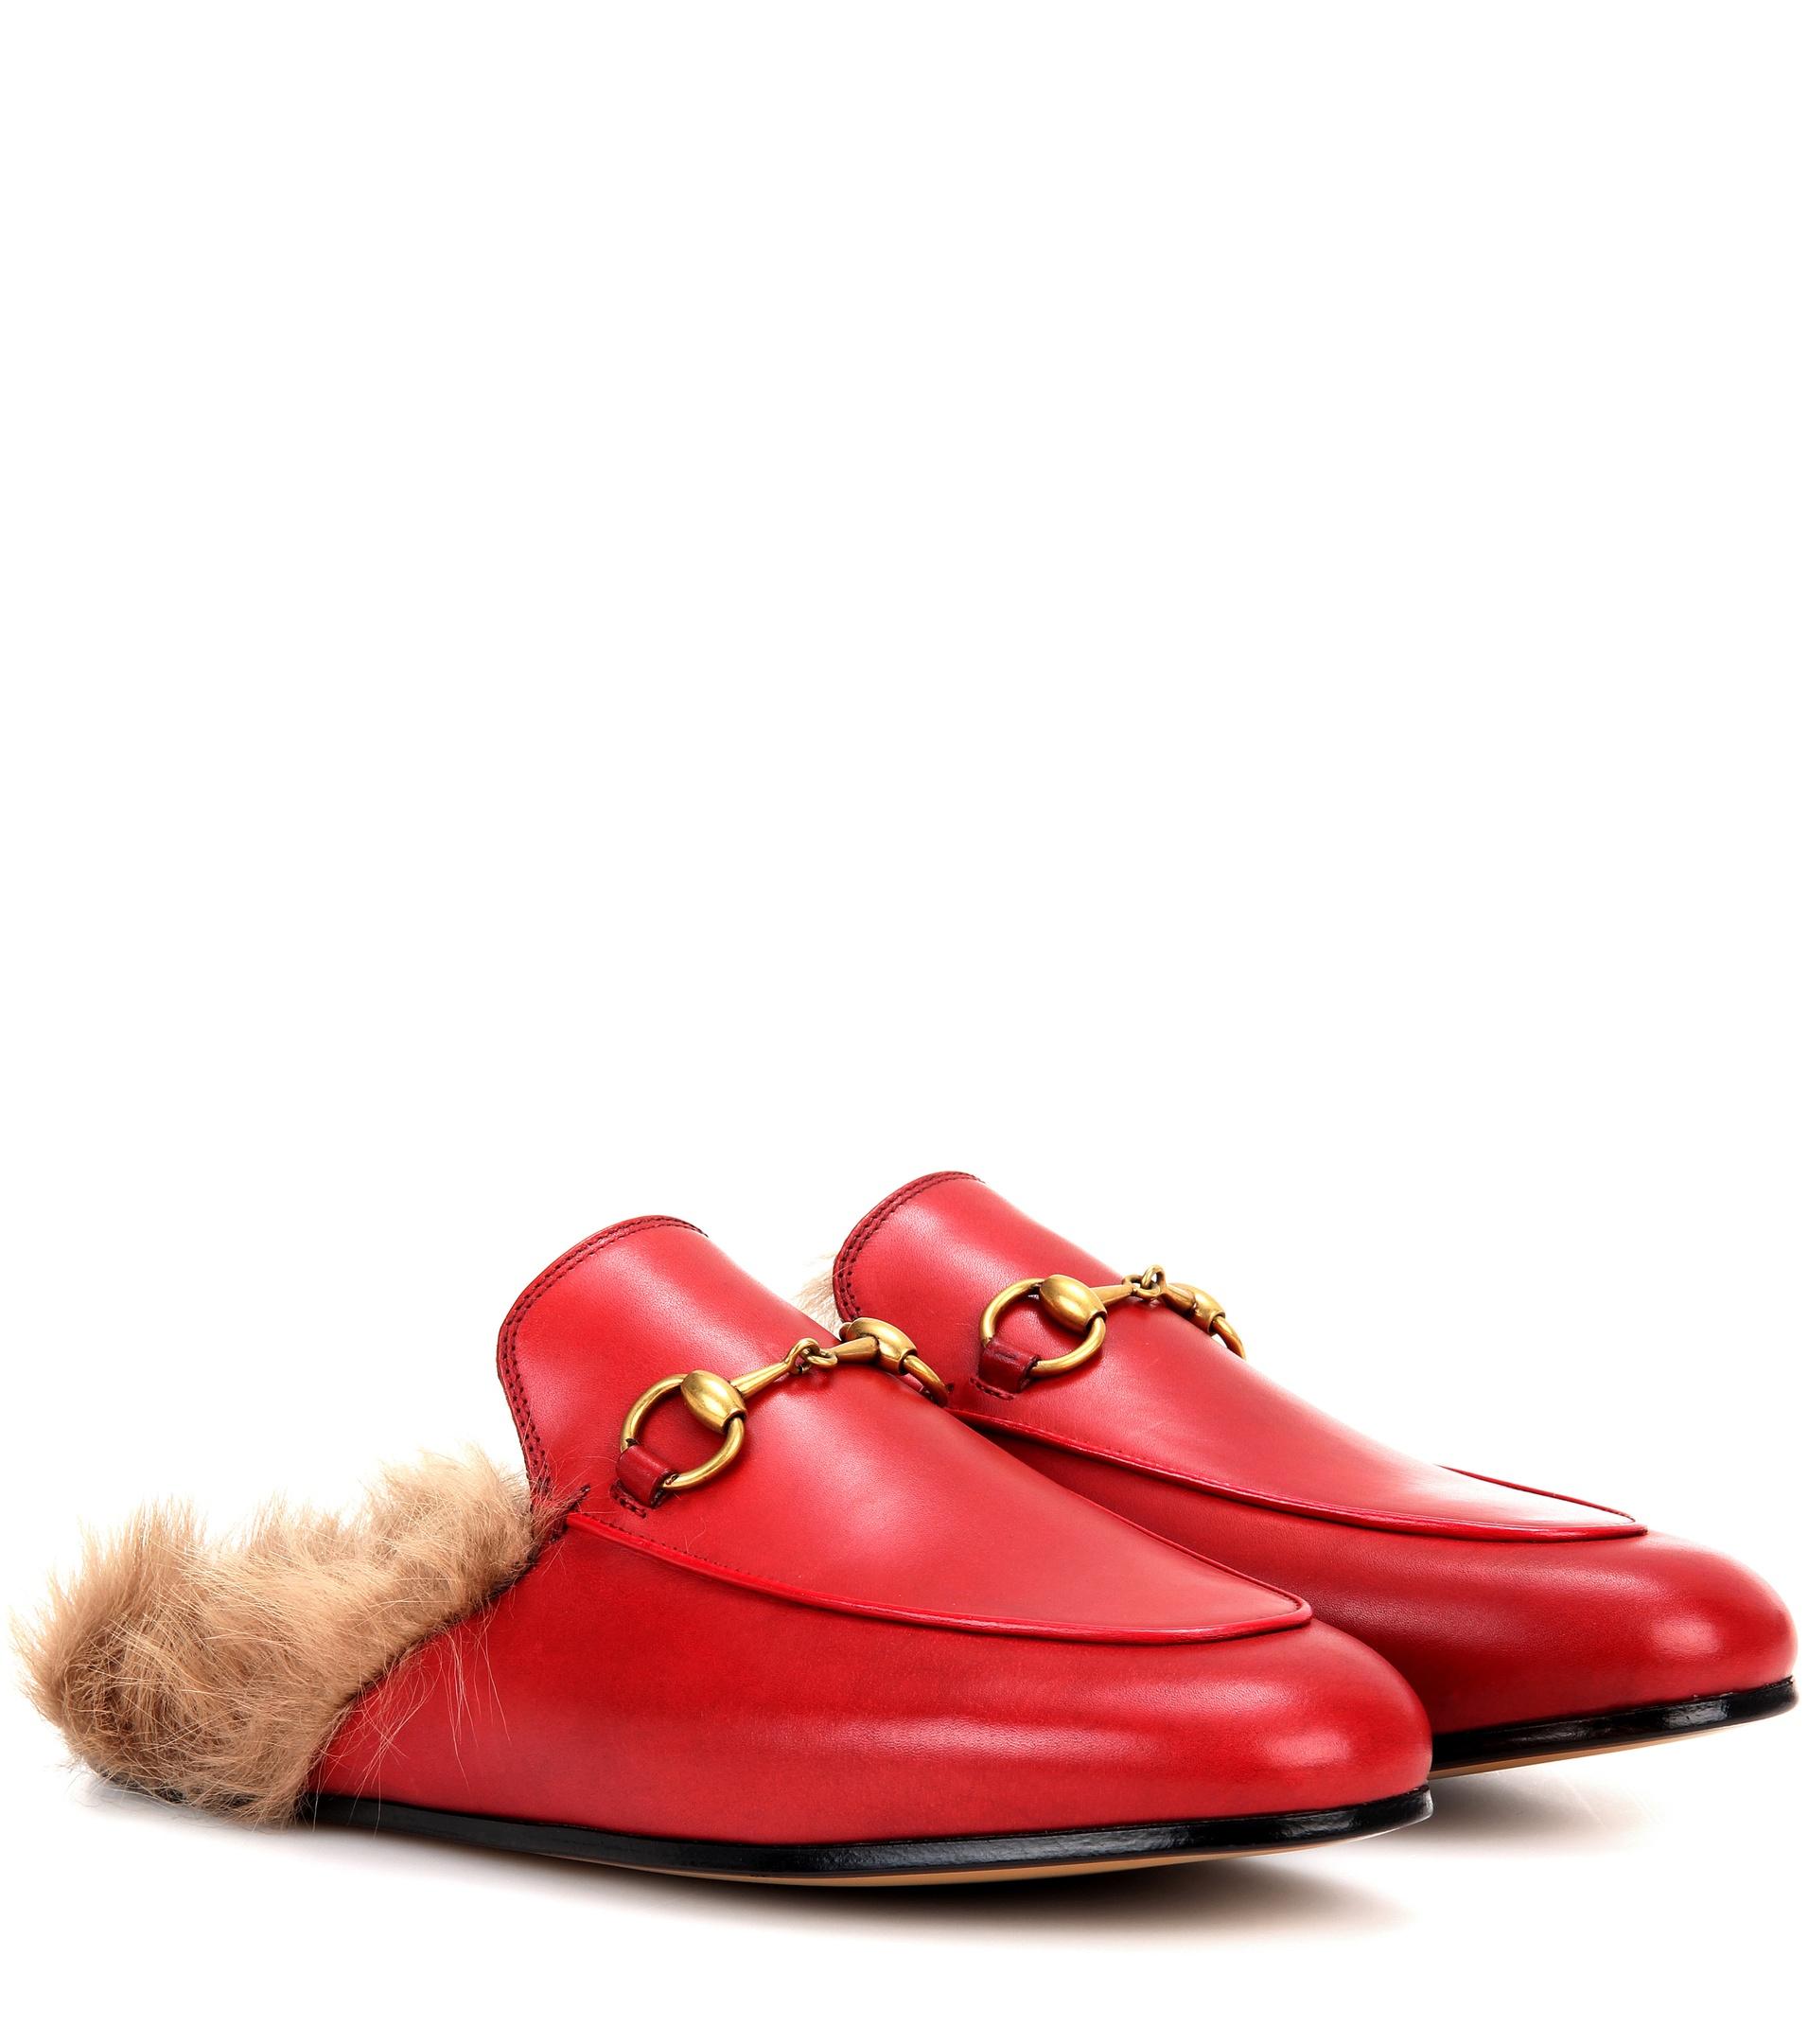 Gucci Princetown Fur-lined Leather Slippers in Red | Lyst